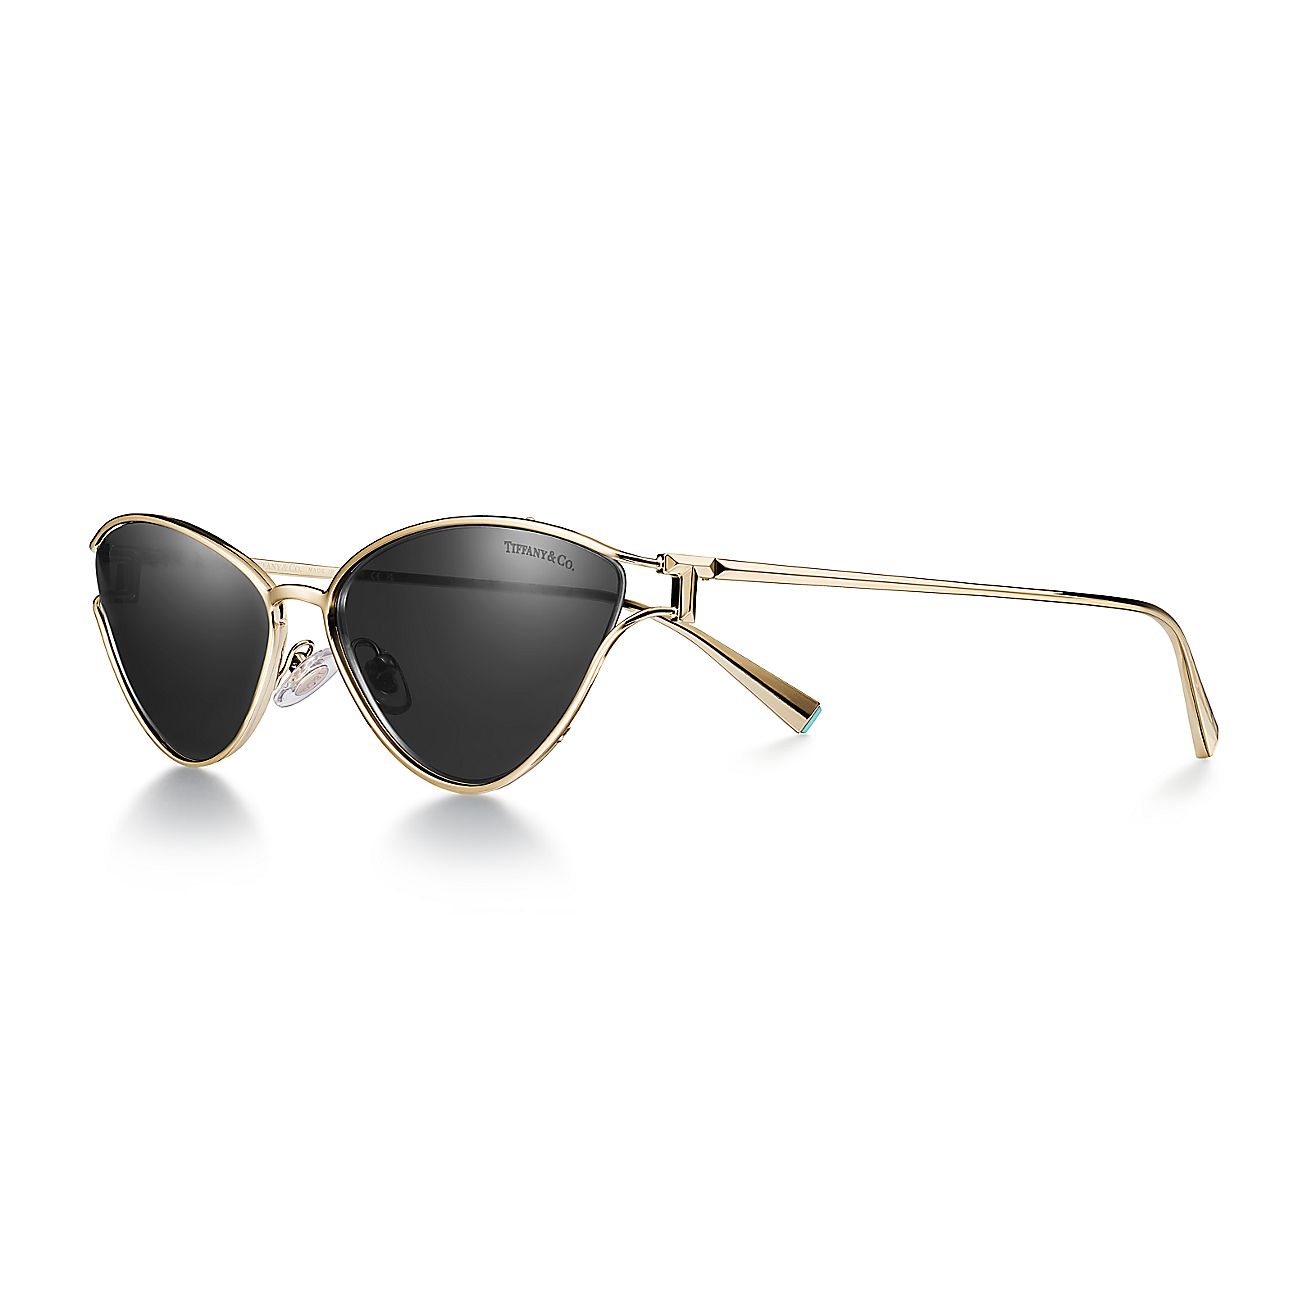 Tiffany T Sunglasses in Pale Gold-colored Metal with Dark Gray